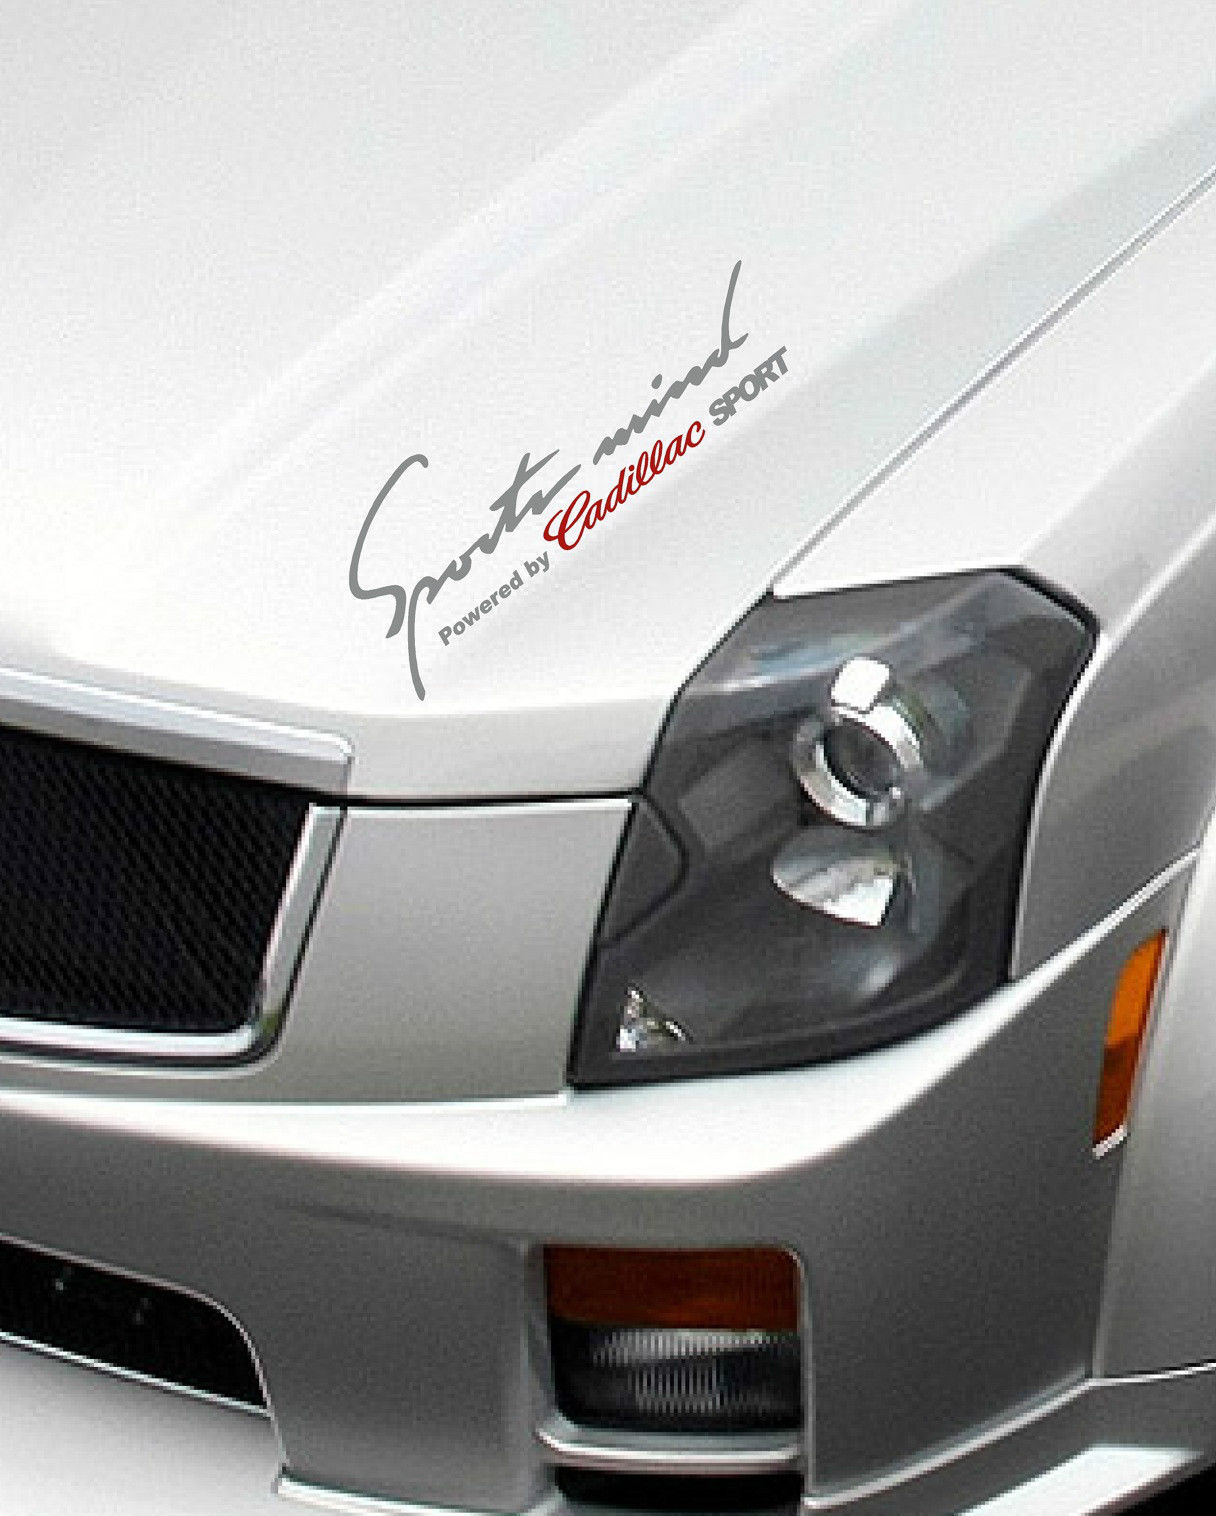 Sports mind Powered by CADILLAC SPORT Hood Decal sticker